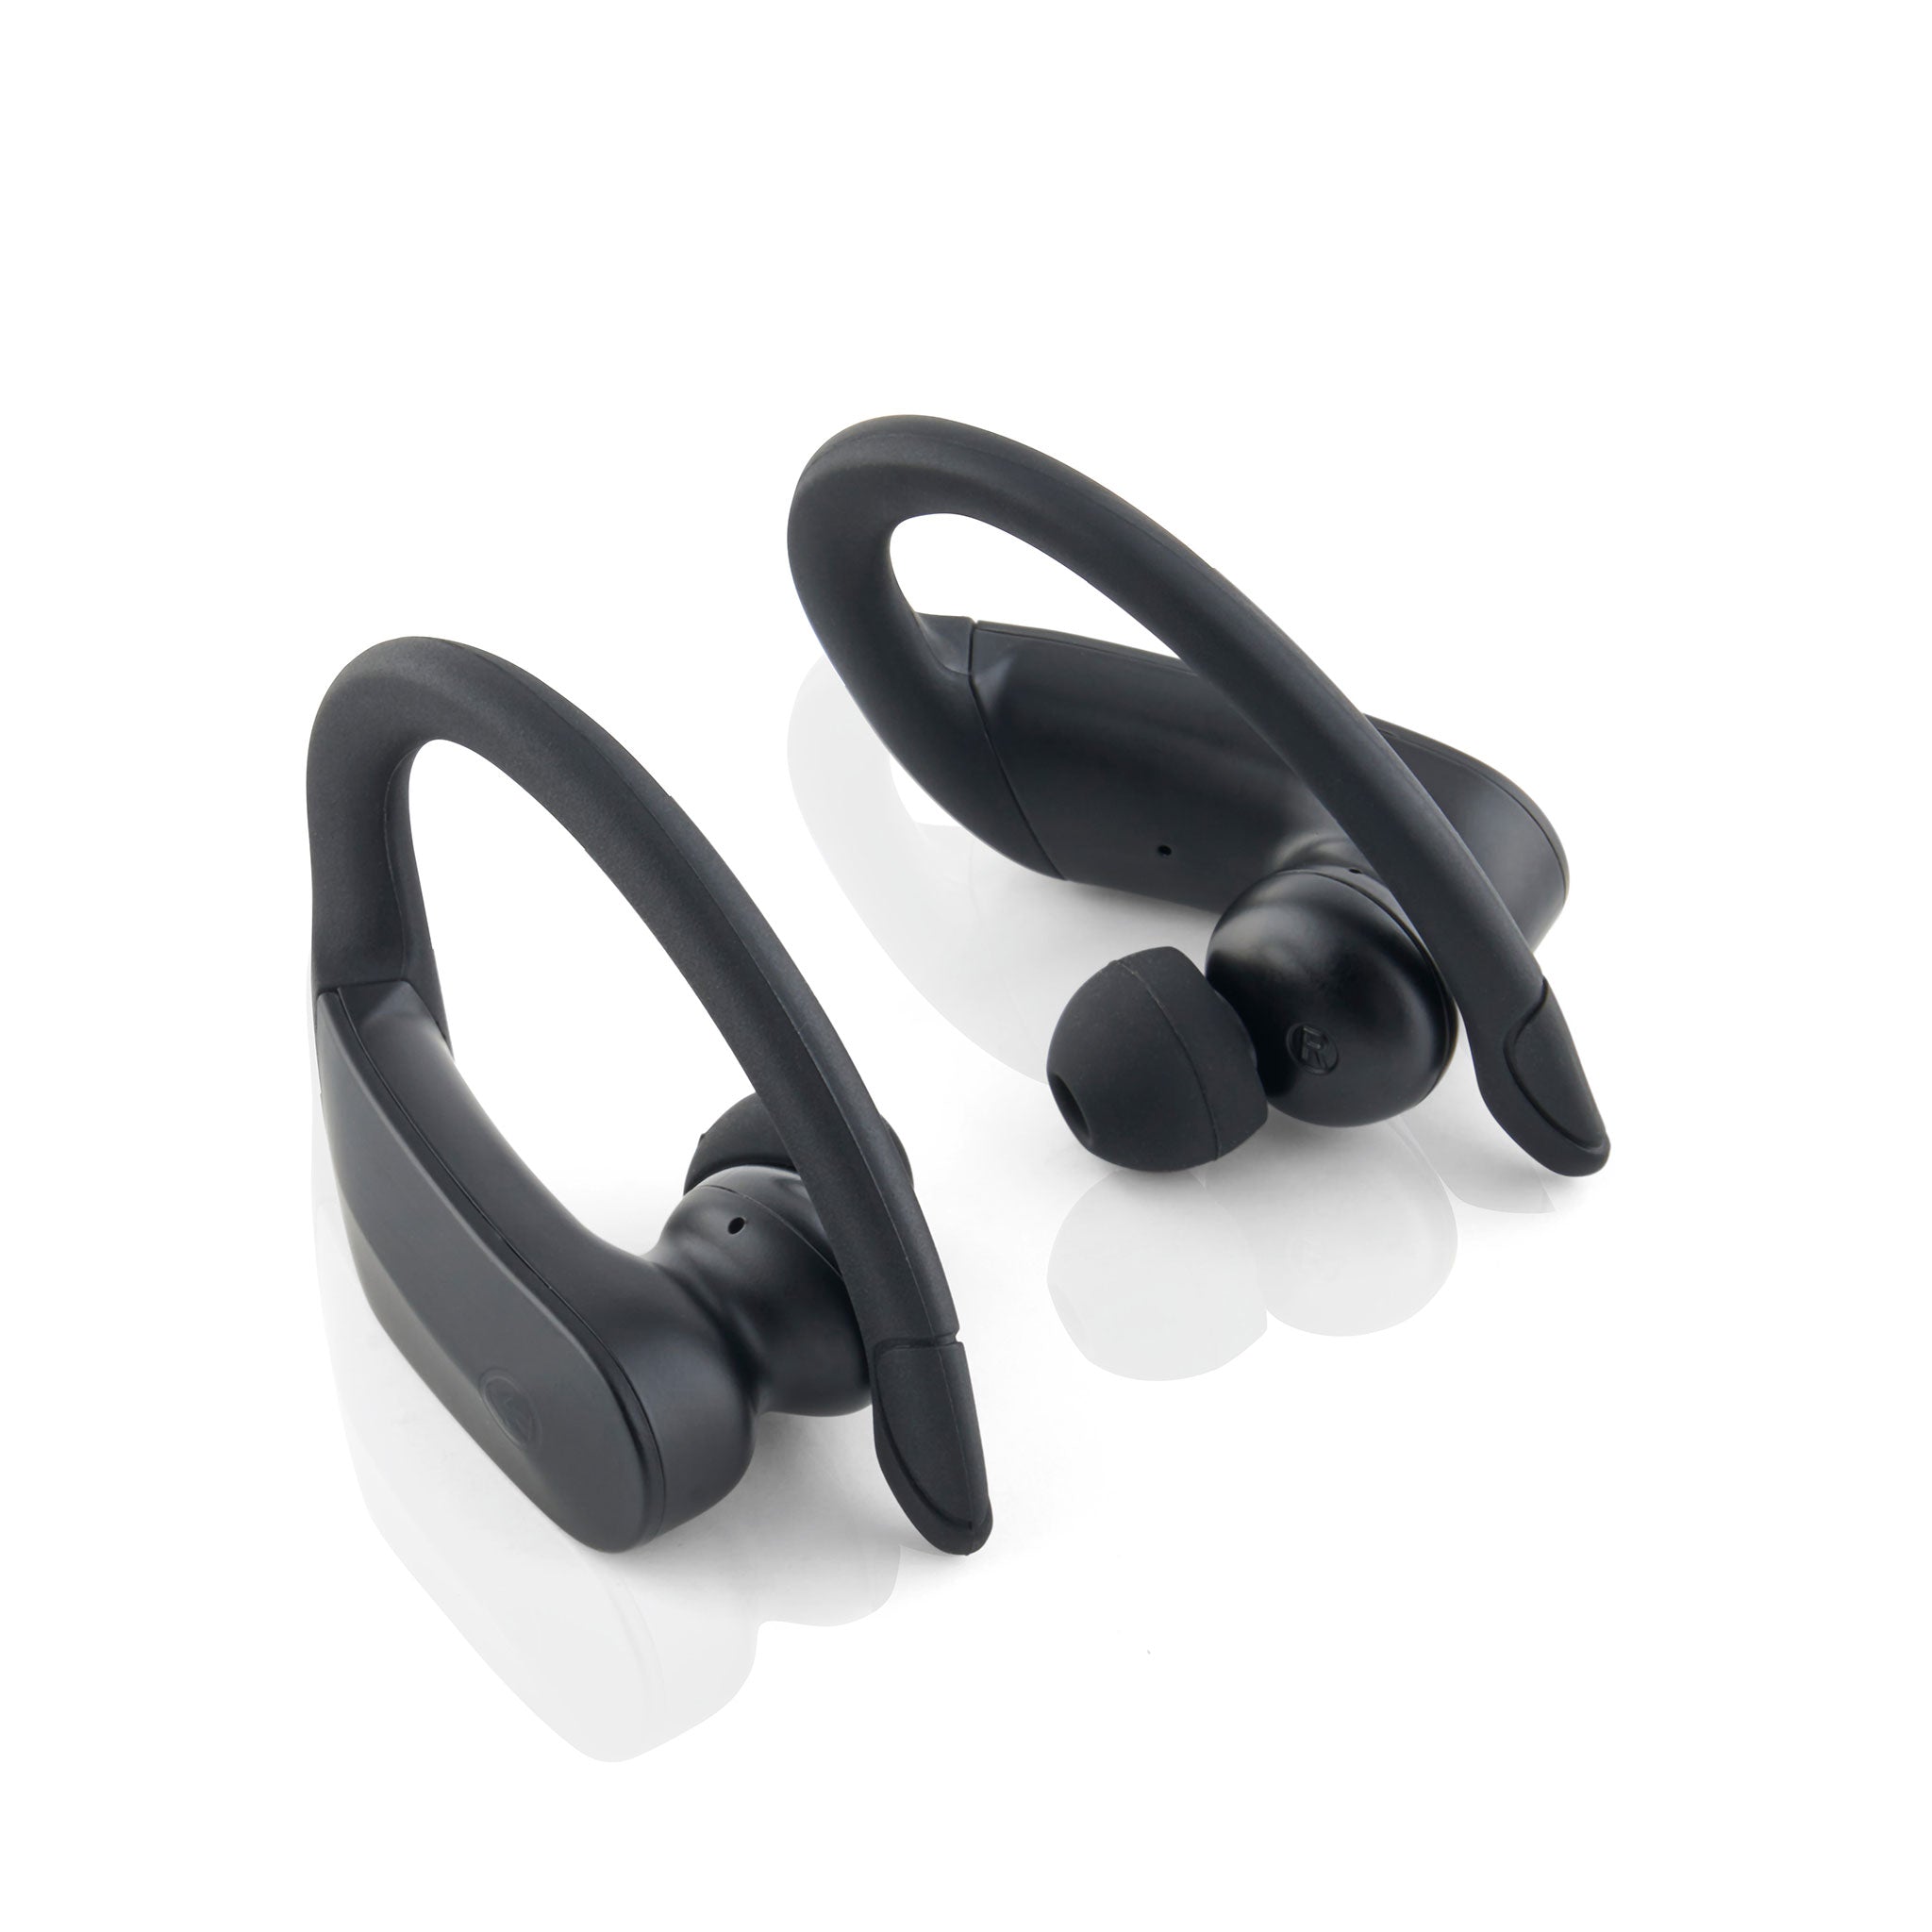 Free Mantas 2.0 Earbuds With Recharging Case